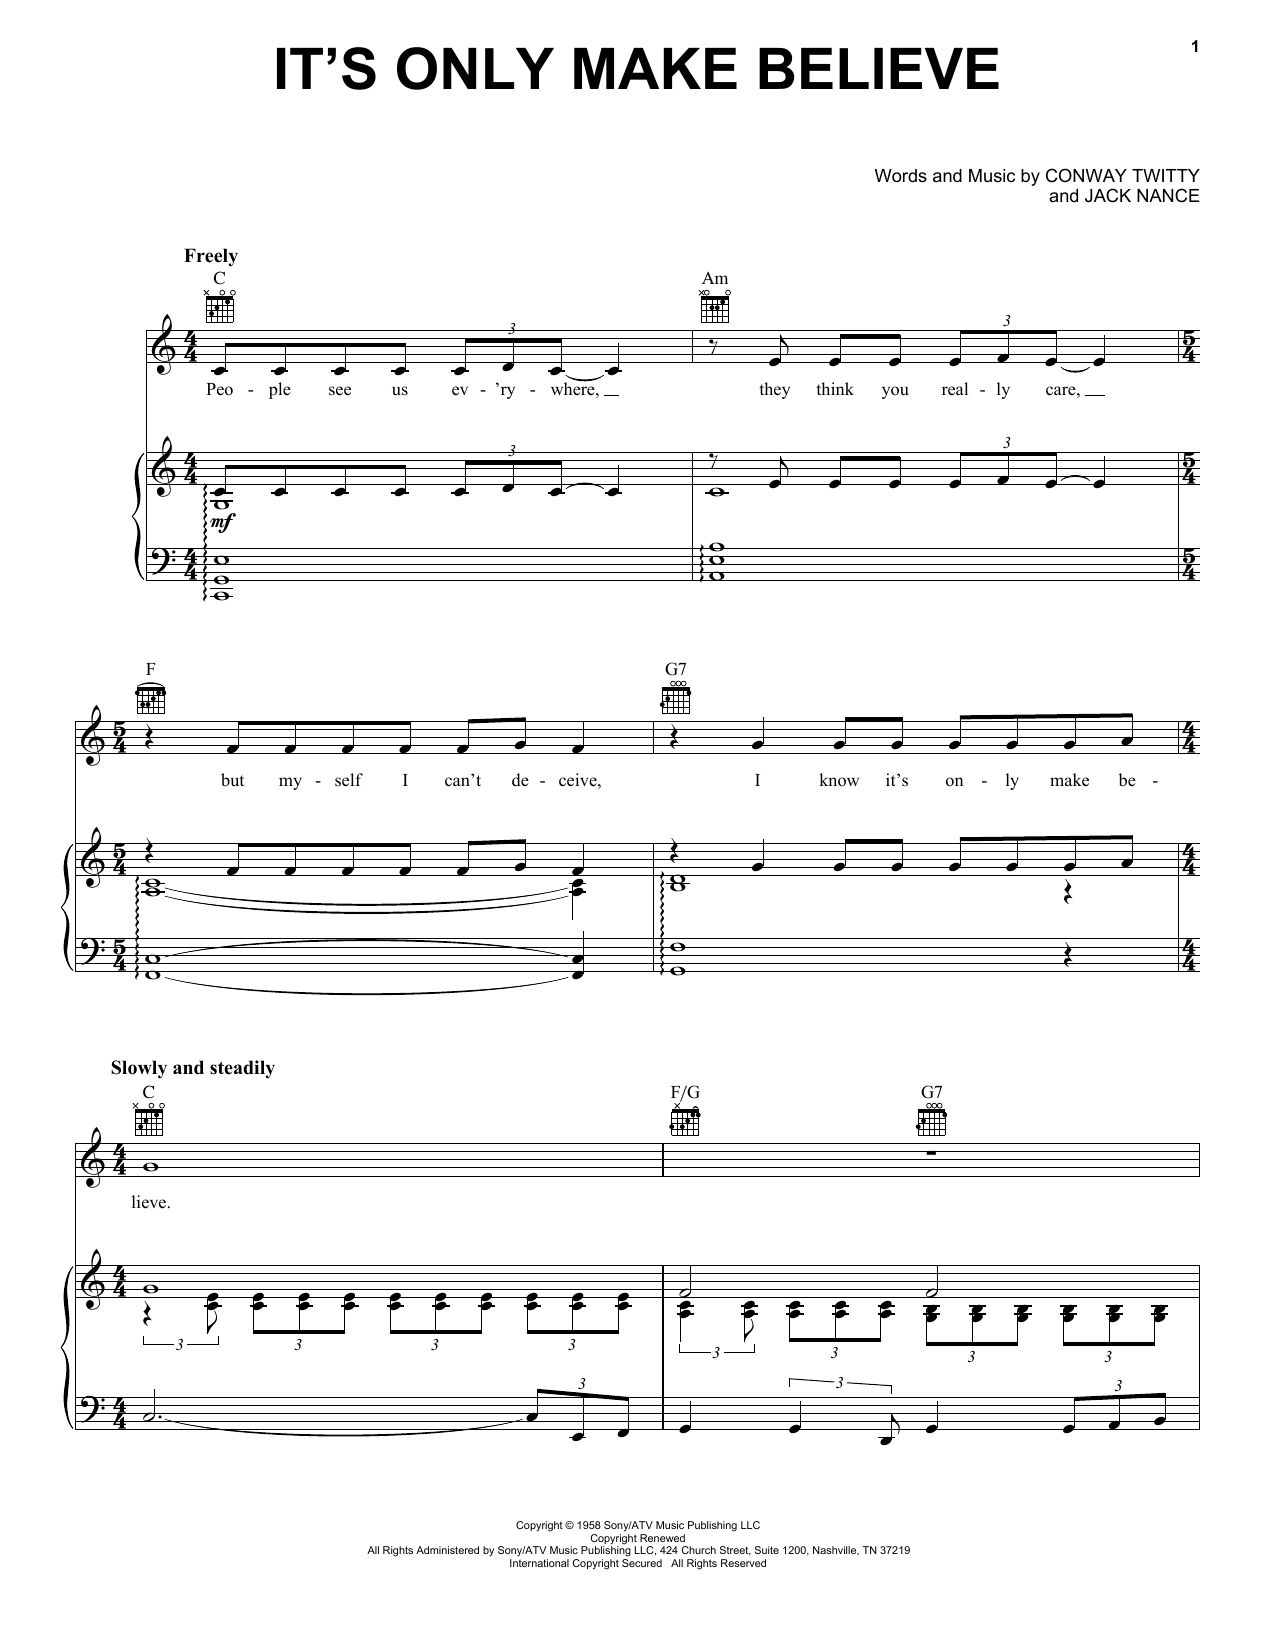 Conway Twitty It's Only Make Believe sheet music notes printable PDF score